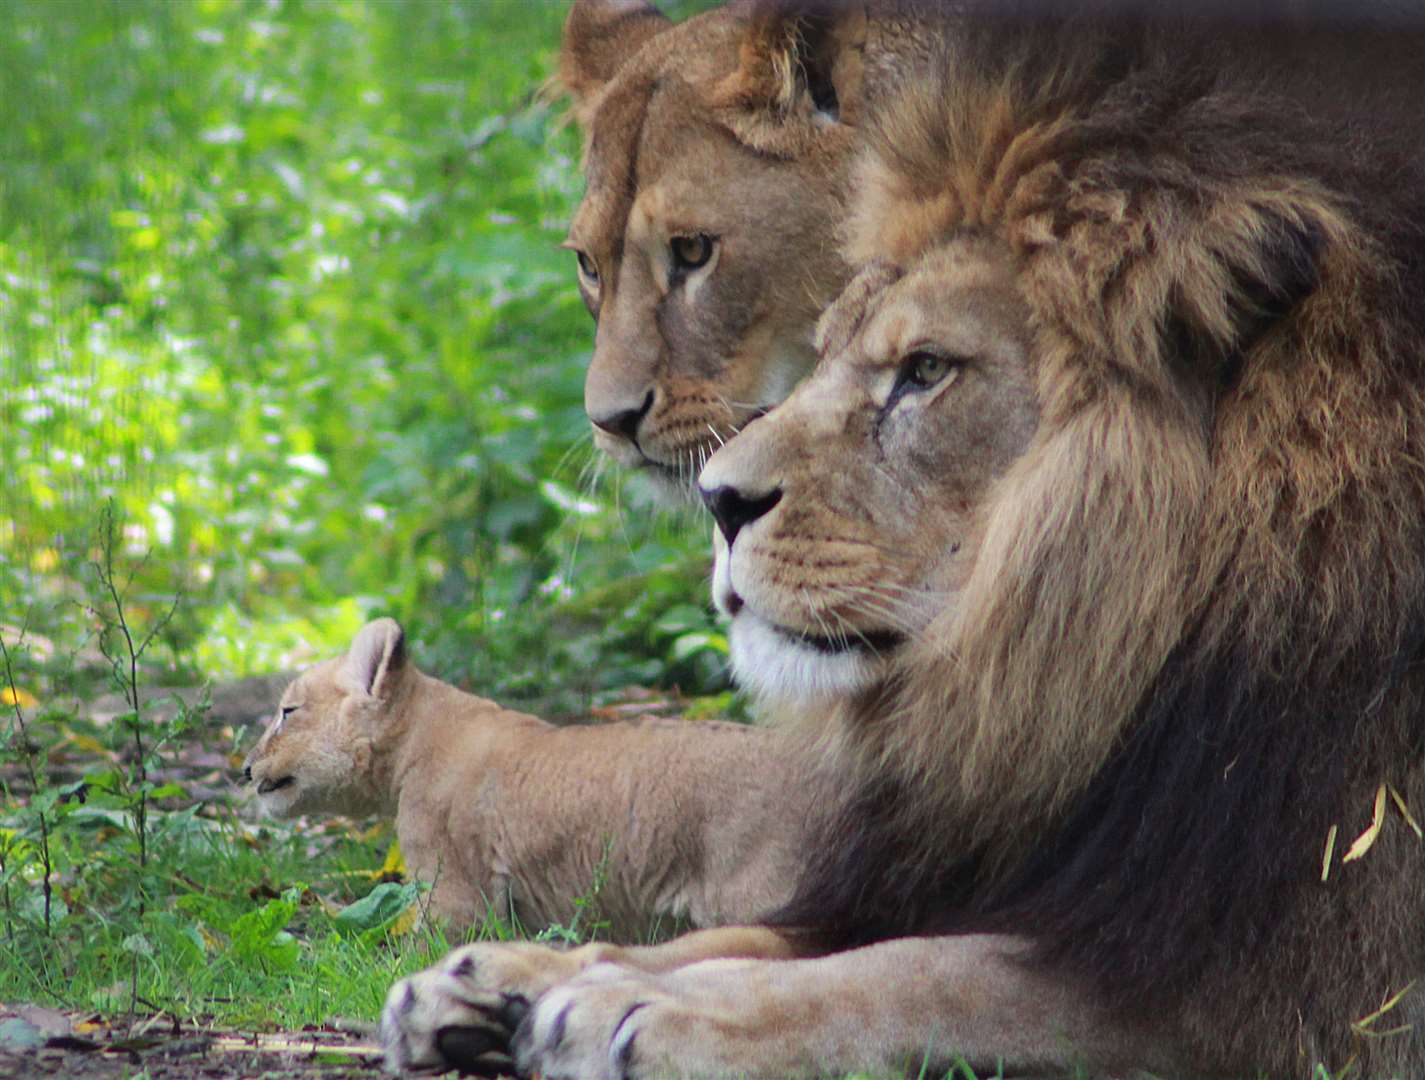 Parents Adras and Oudrika with their young cubs (12889835)